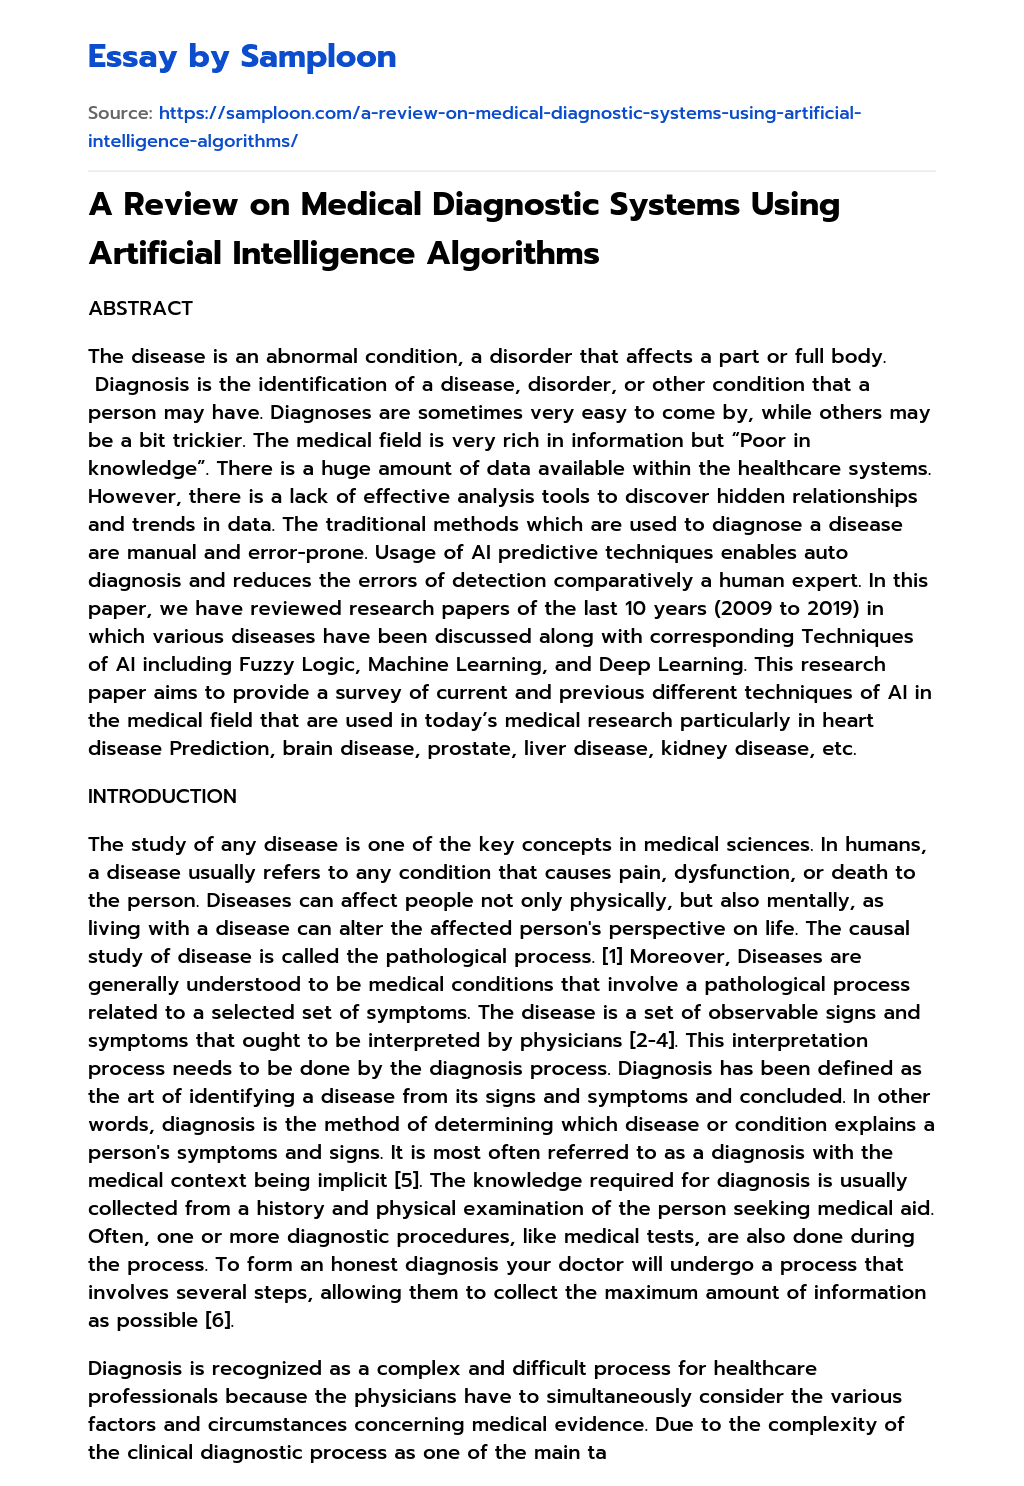 A Review on Medical Diagnostic Systems Using Artificial Intelligence Algorithms essay